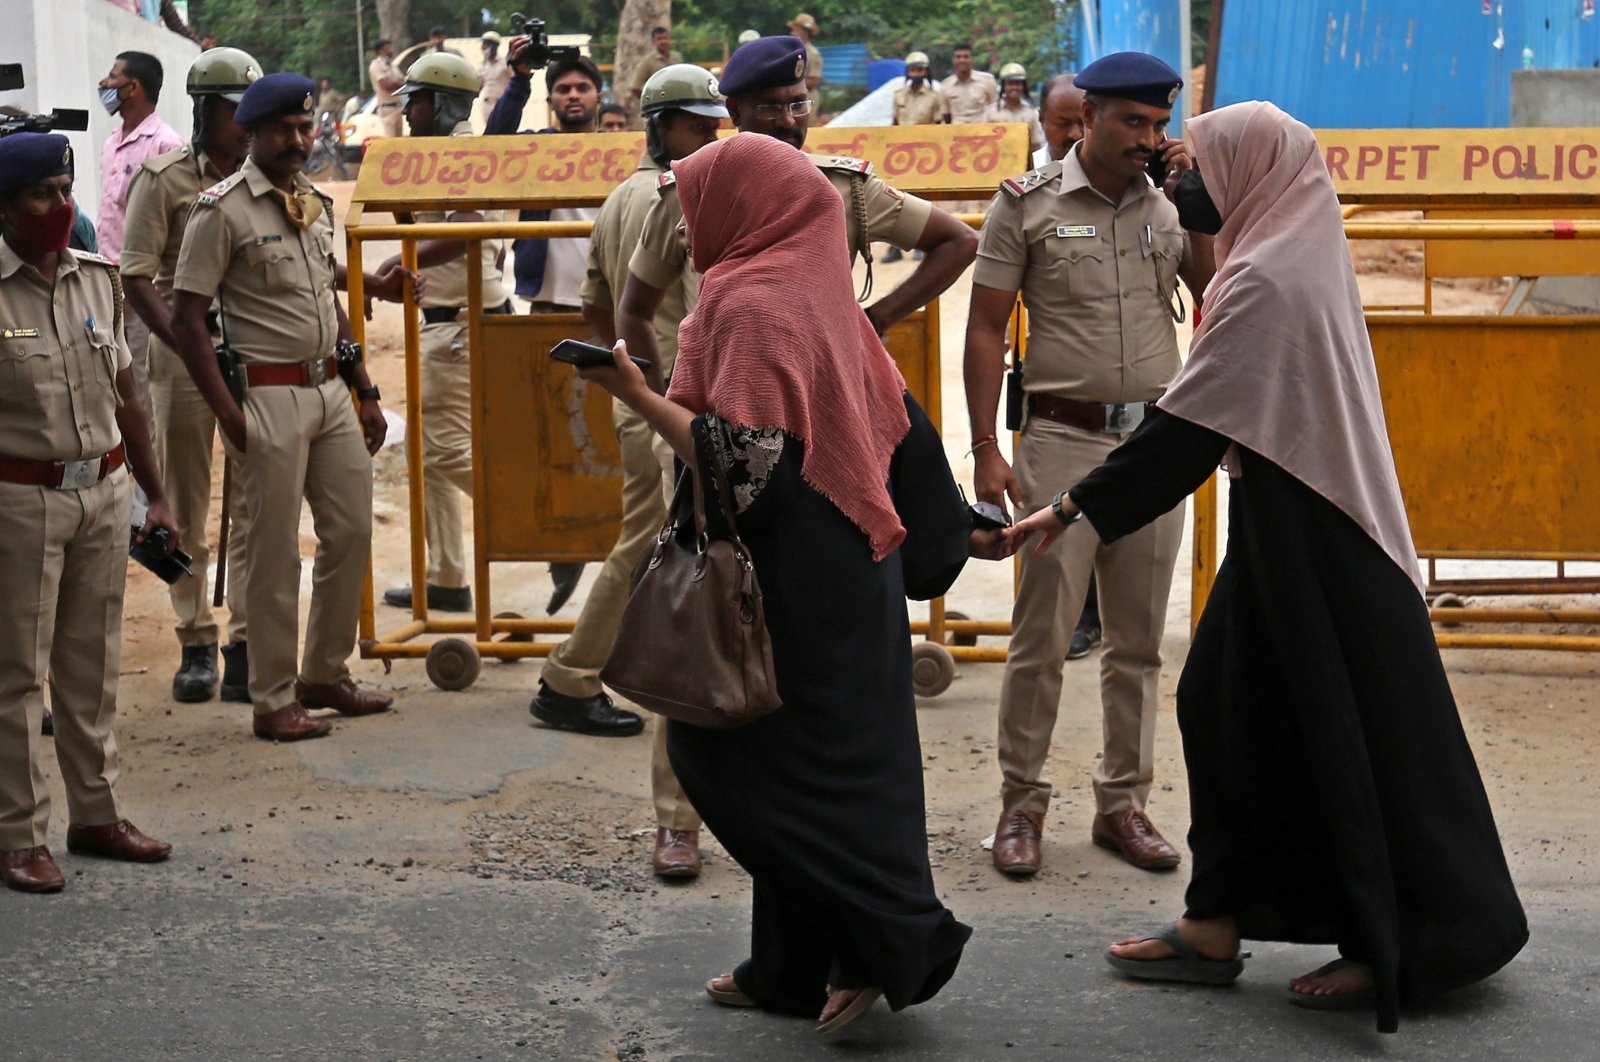 Indian Muslim women stand in front of police personnel during a protest over the hijab ban organized by a Muslim organization in Bengaluru, India, March 26, 2022. (EPA Photo)